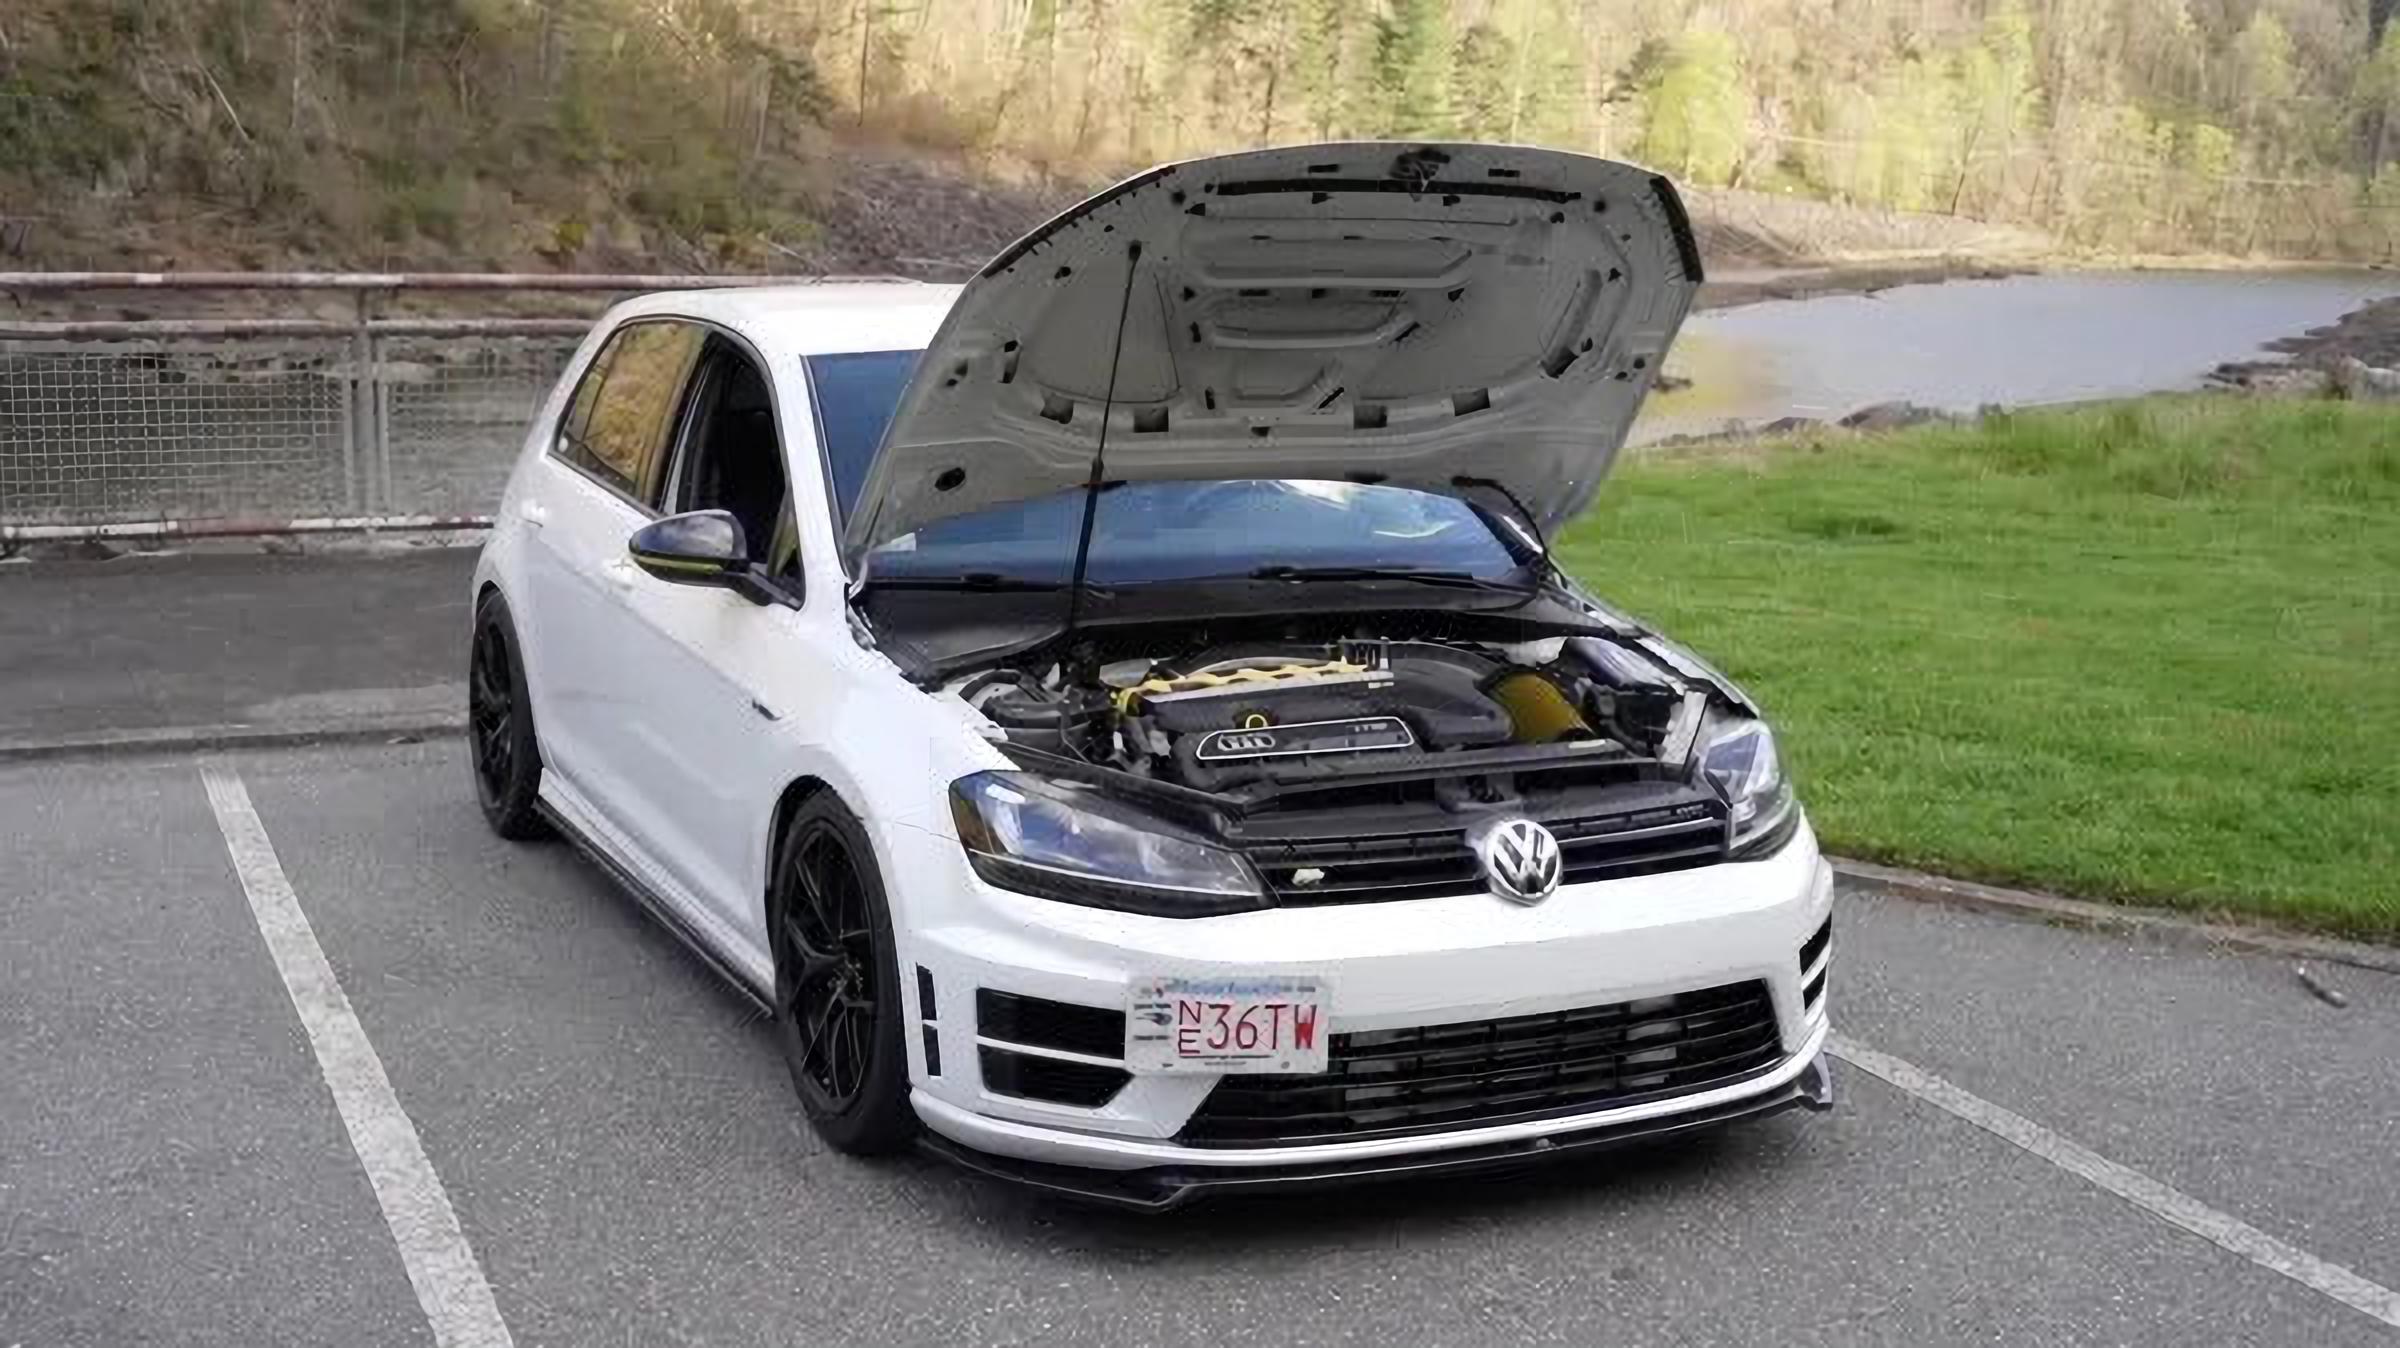 This VW Golf MK 7 Packs a Turbo Audi Surprise Under the Hood, Is